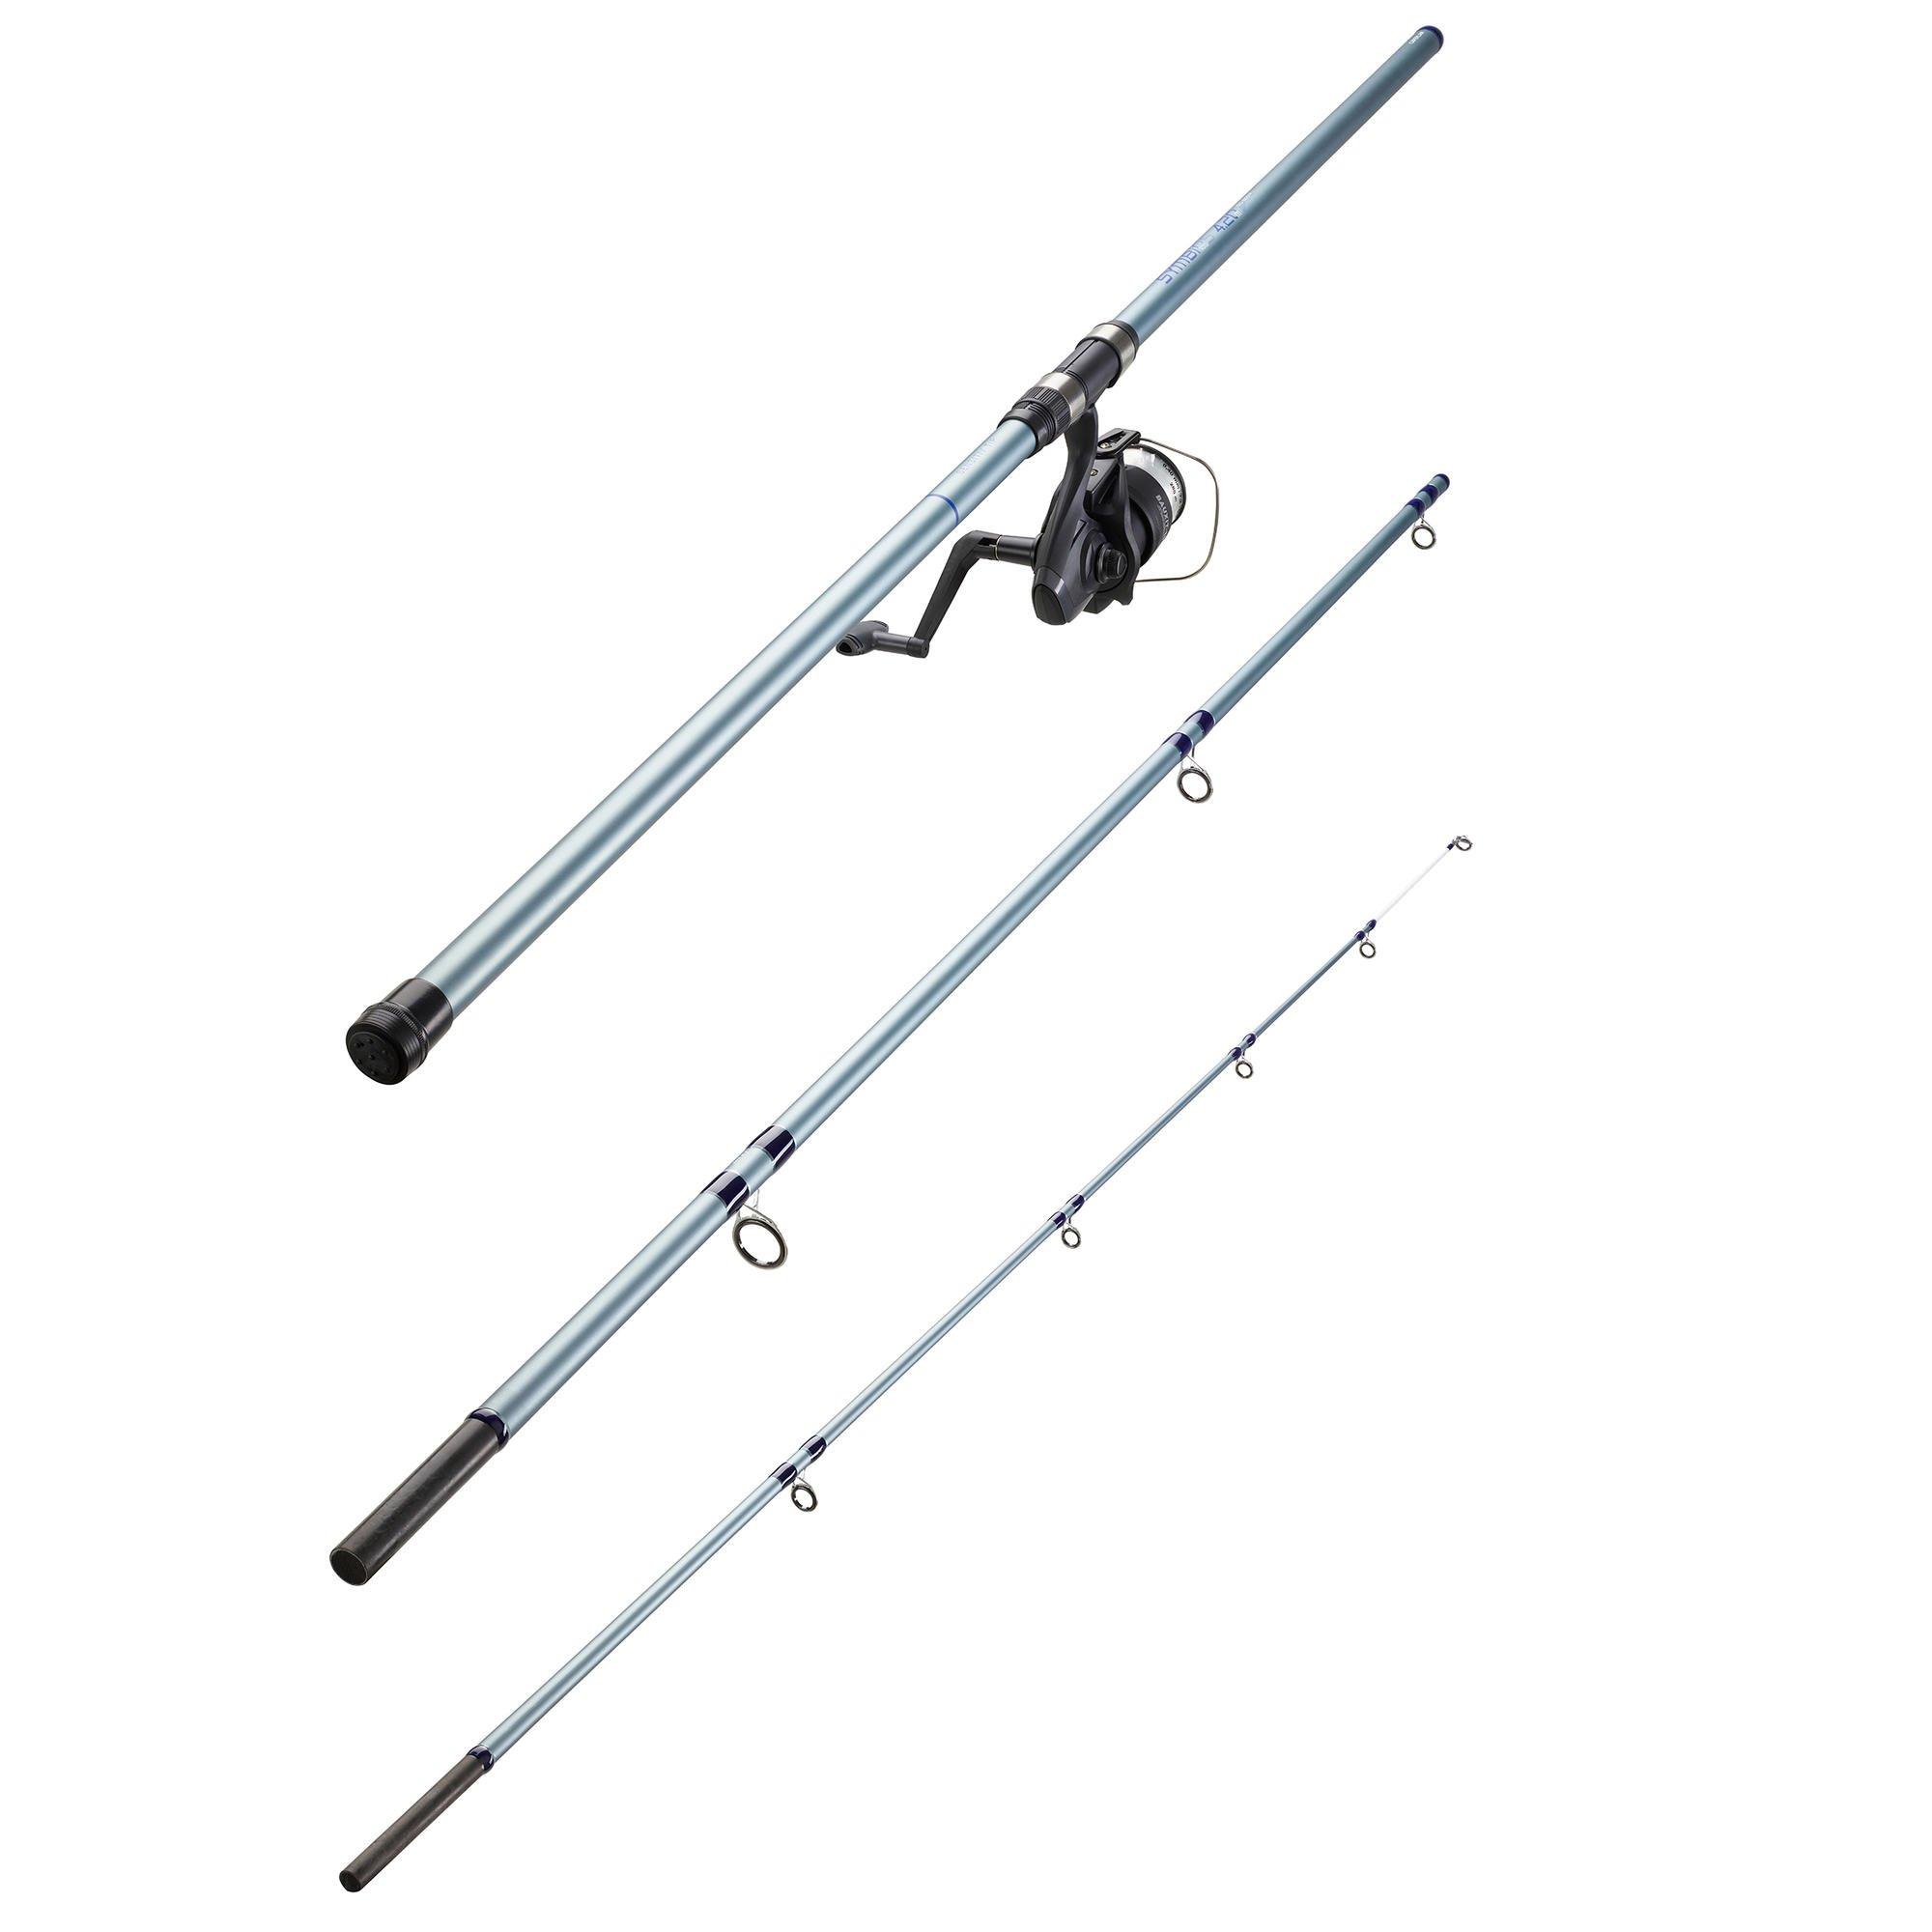 Decathlon Fishing Surfcasting Rod And Reel Combo Symbios-100 420 100-200G